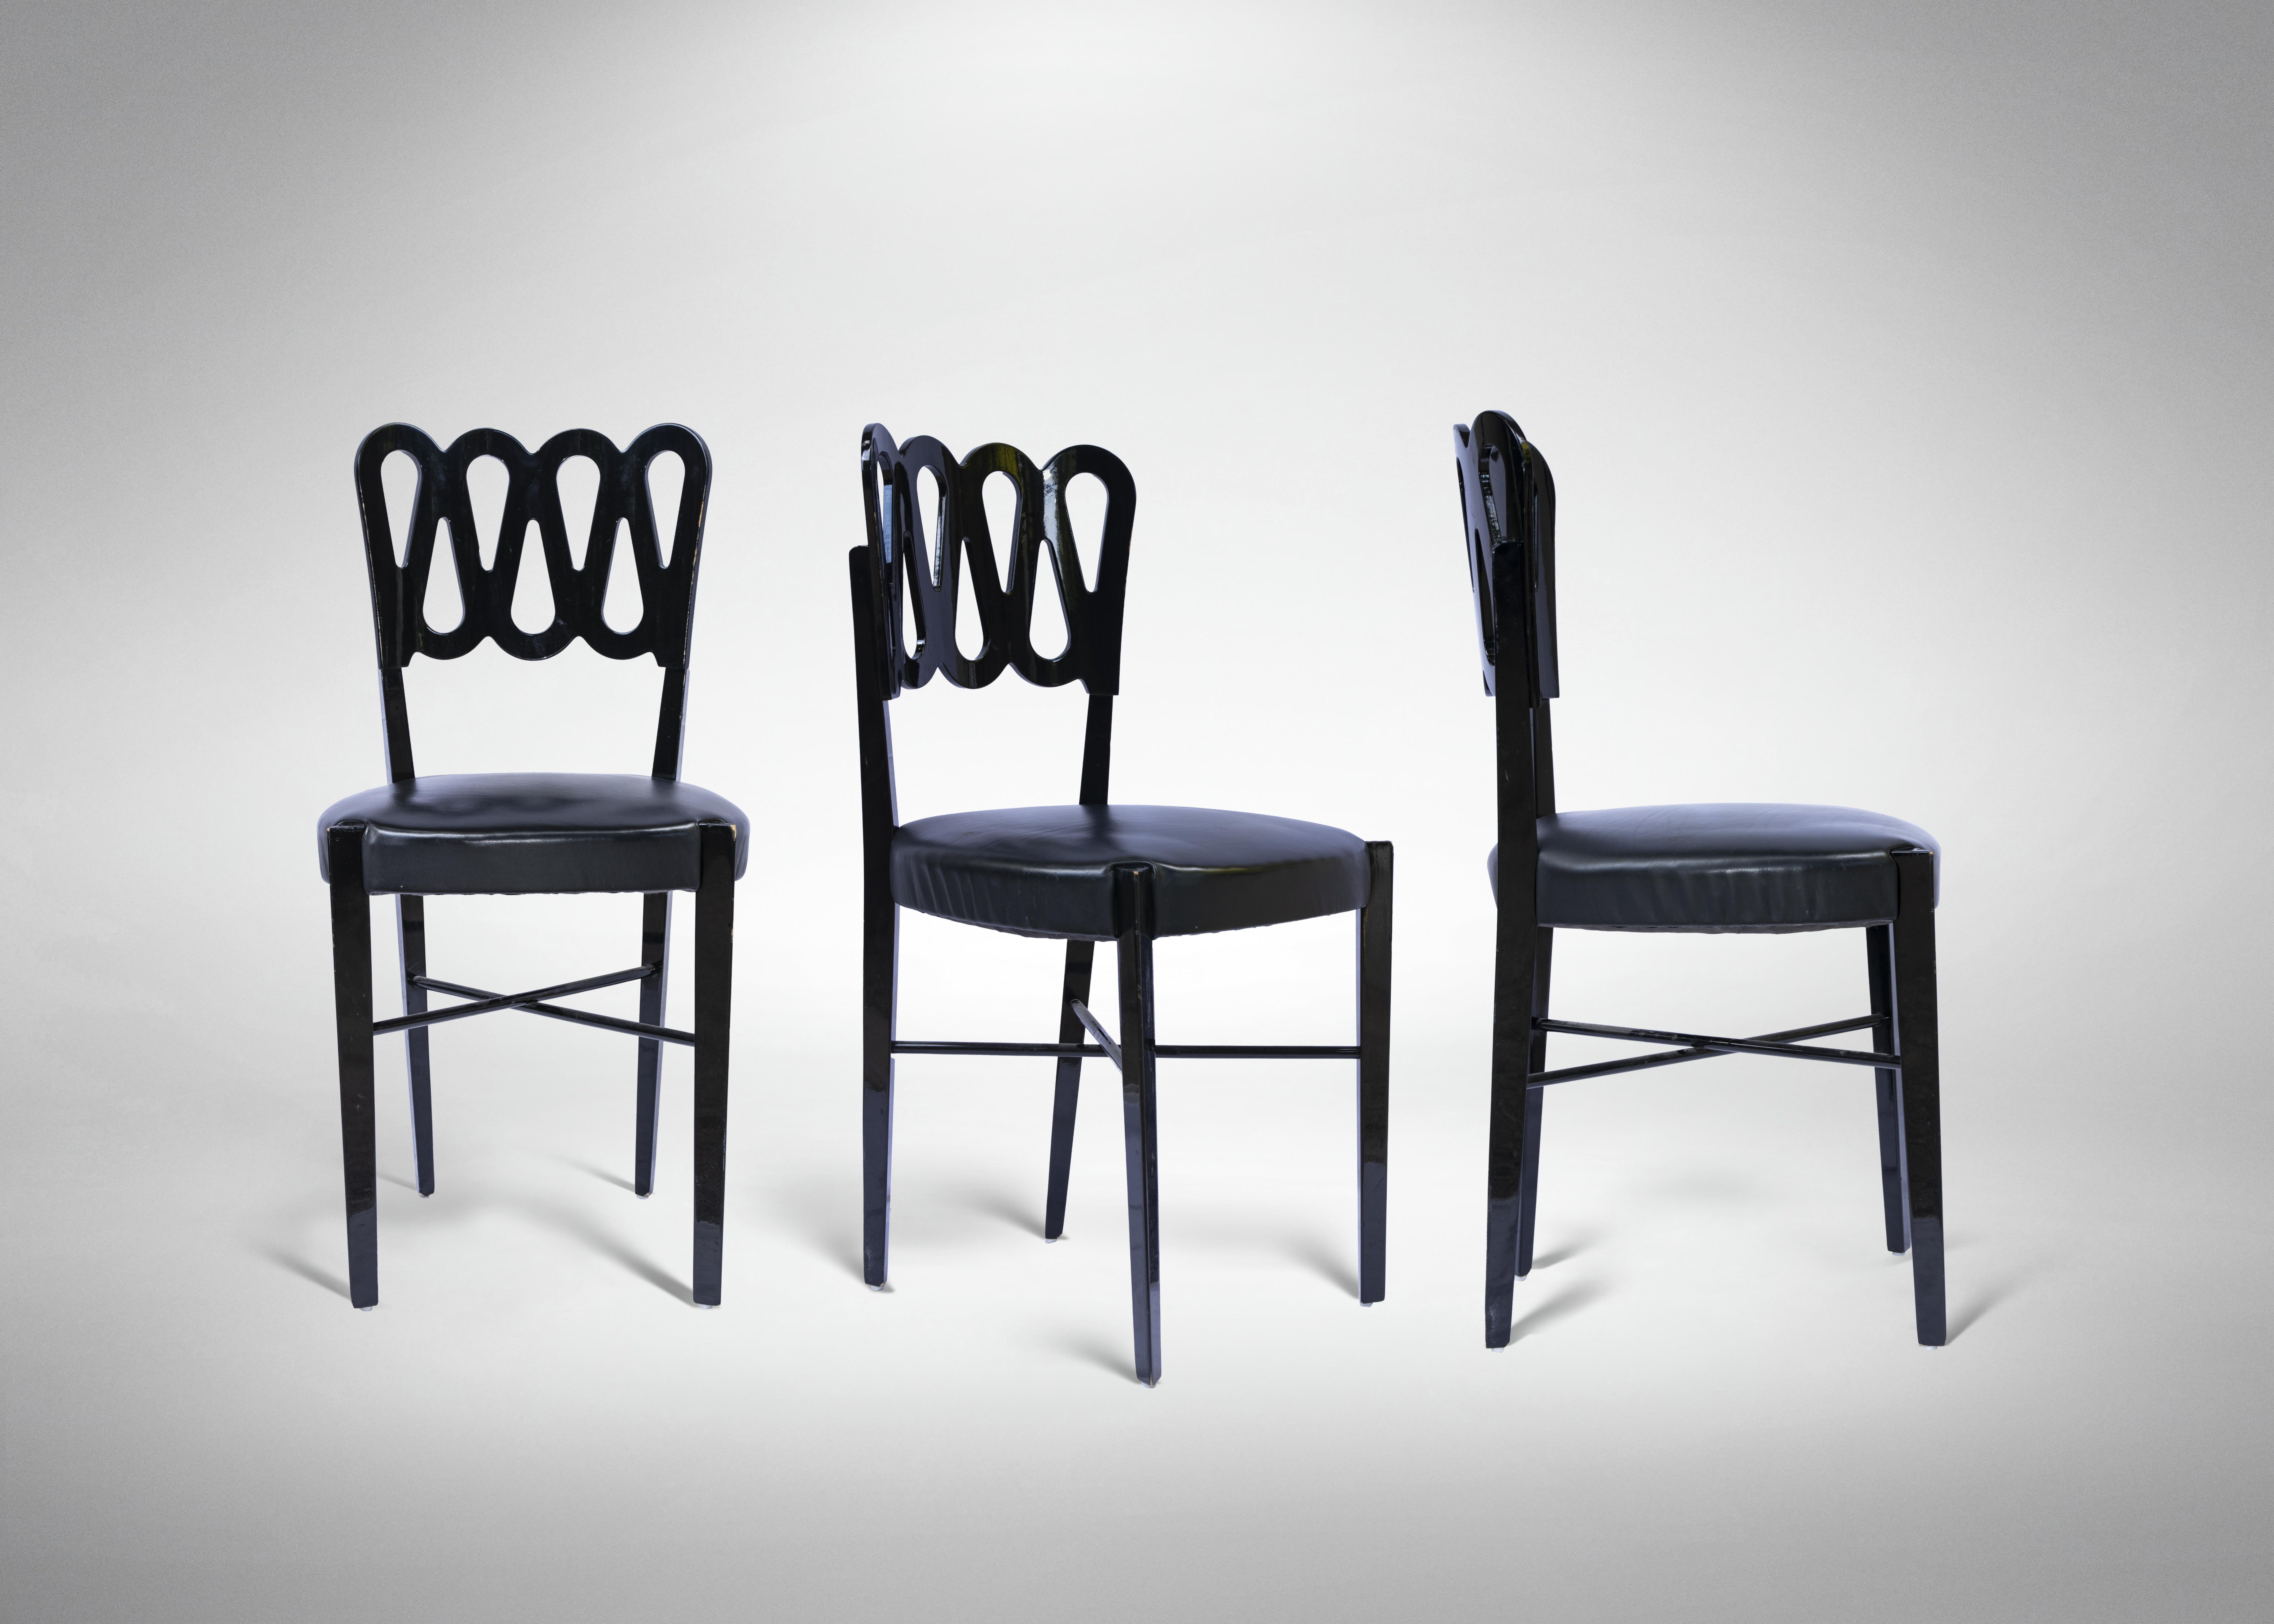 Set of 4 Vintage Chairs Model 969 by Gio Ponti for BBB. 

Italy 1940s.

3 Black and 1 White Chairs.

Structure in lacquered beech wood and seat in original leather.

h85×42×42: Seat Heigh 42 cm. 

Good conditions except for some minor signs of age. 